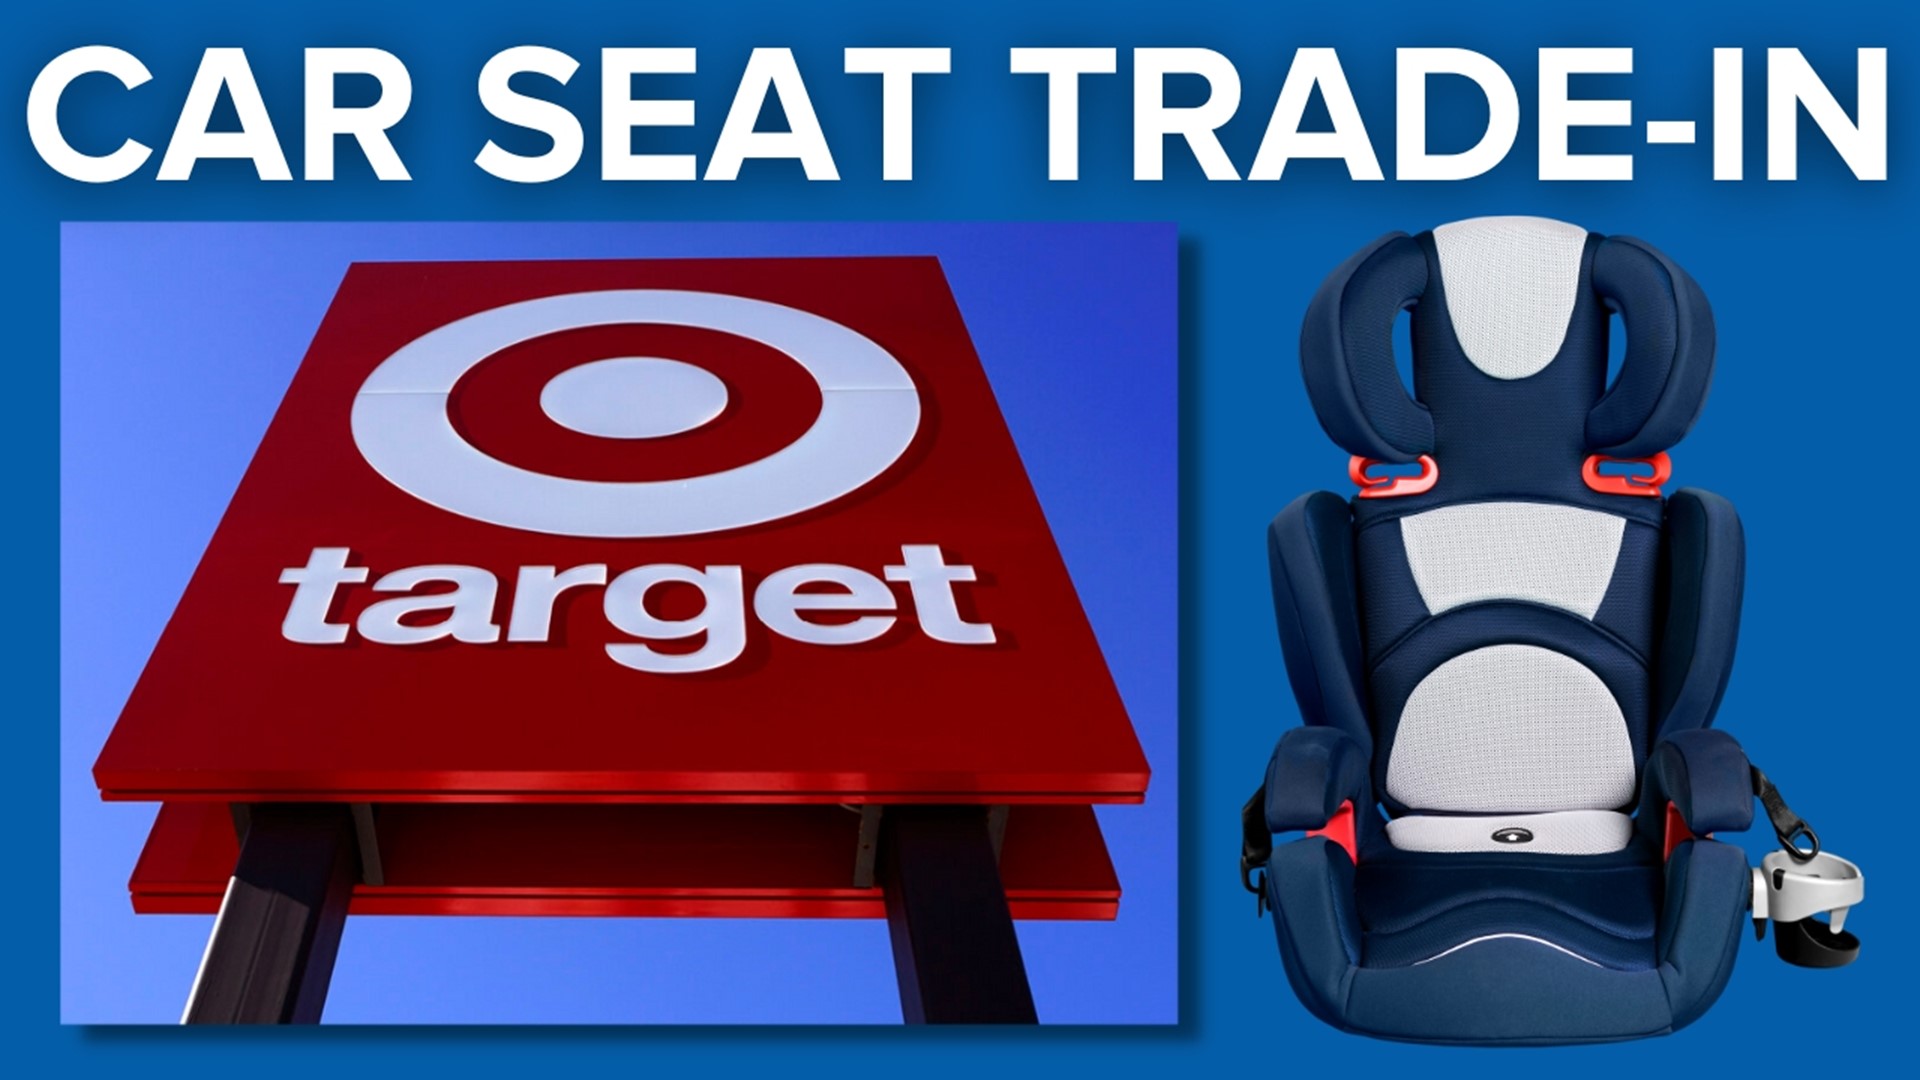 During the trade-in, families can bring in their old car seats for a 20% off store coupon.